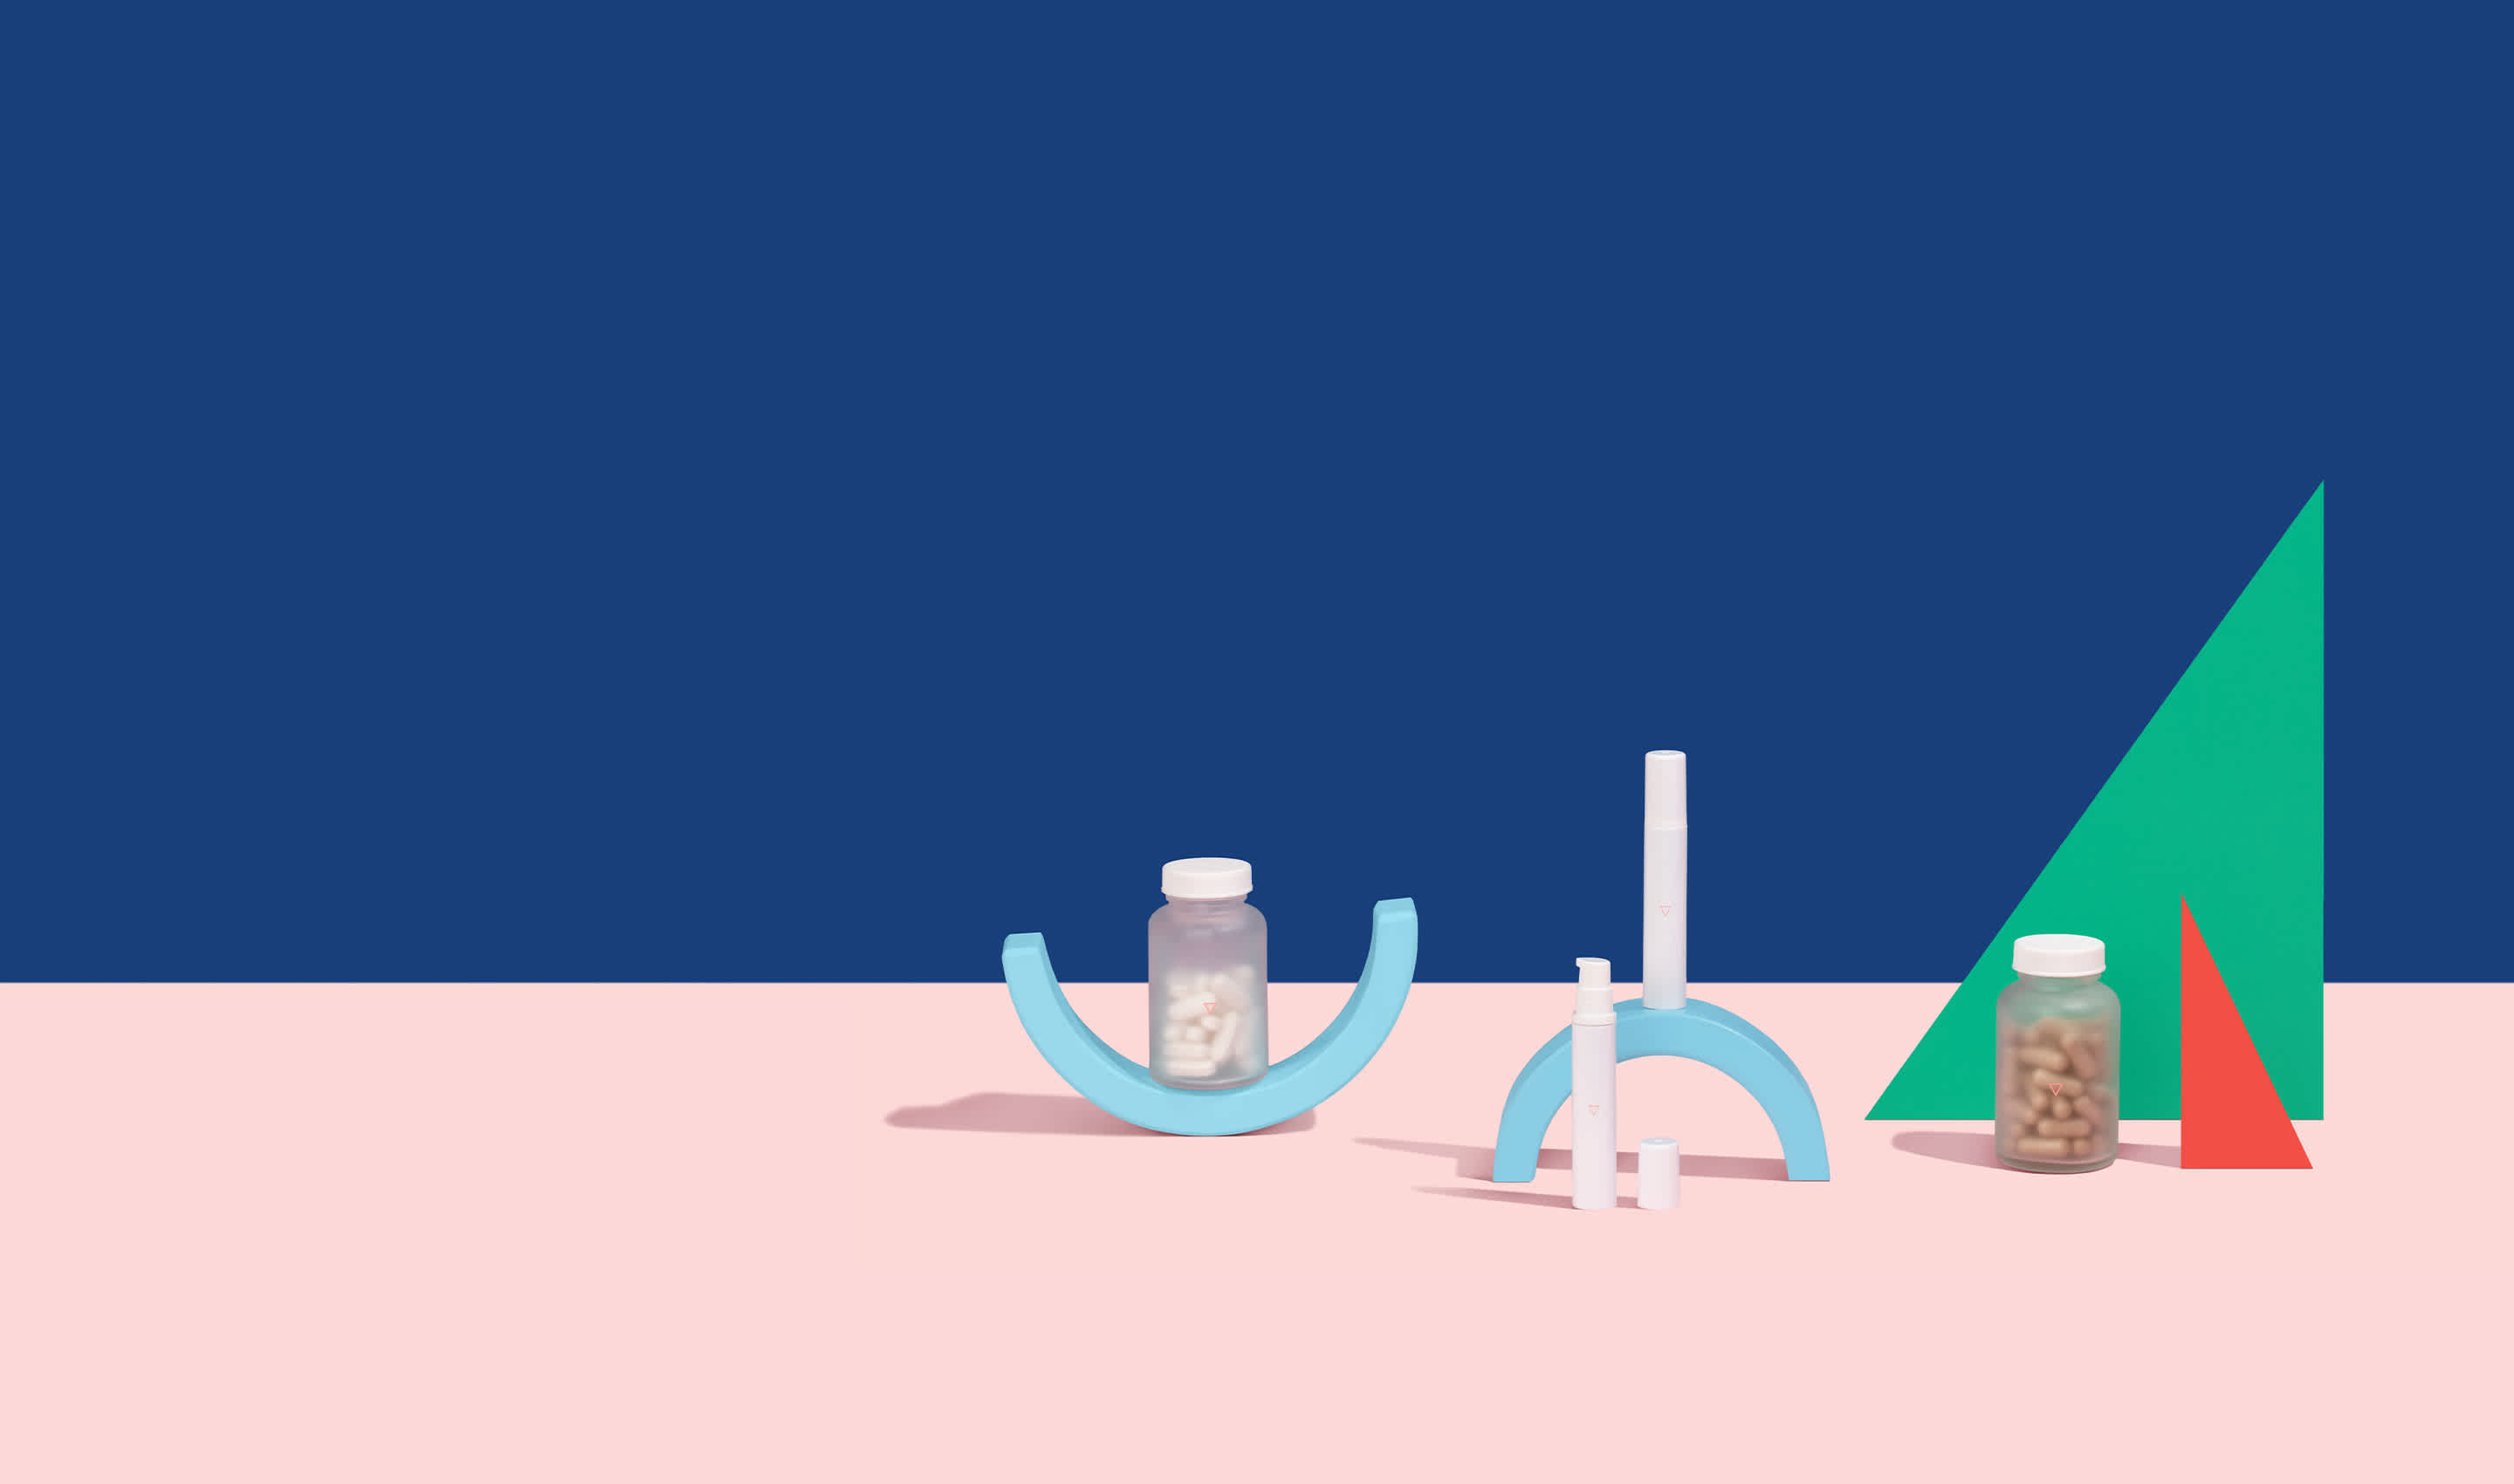 Genital herpes medications balanced on colorful geometric shapes on a pink surface in front of a blue background.